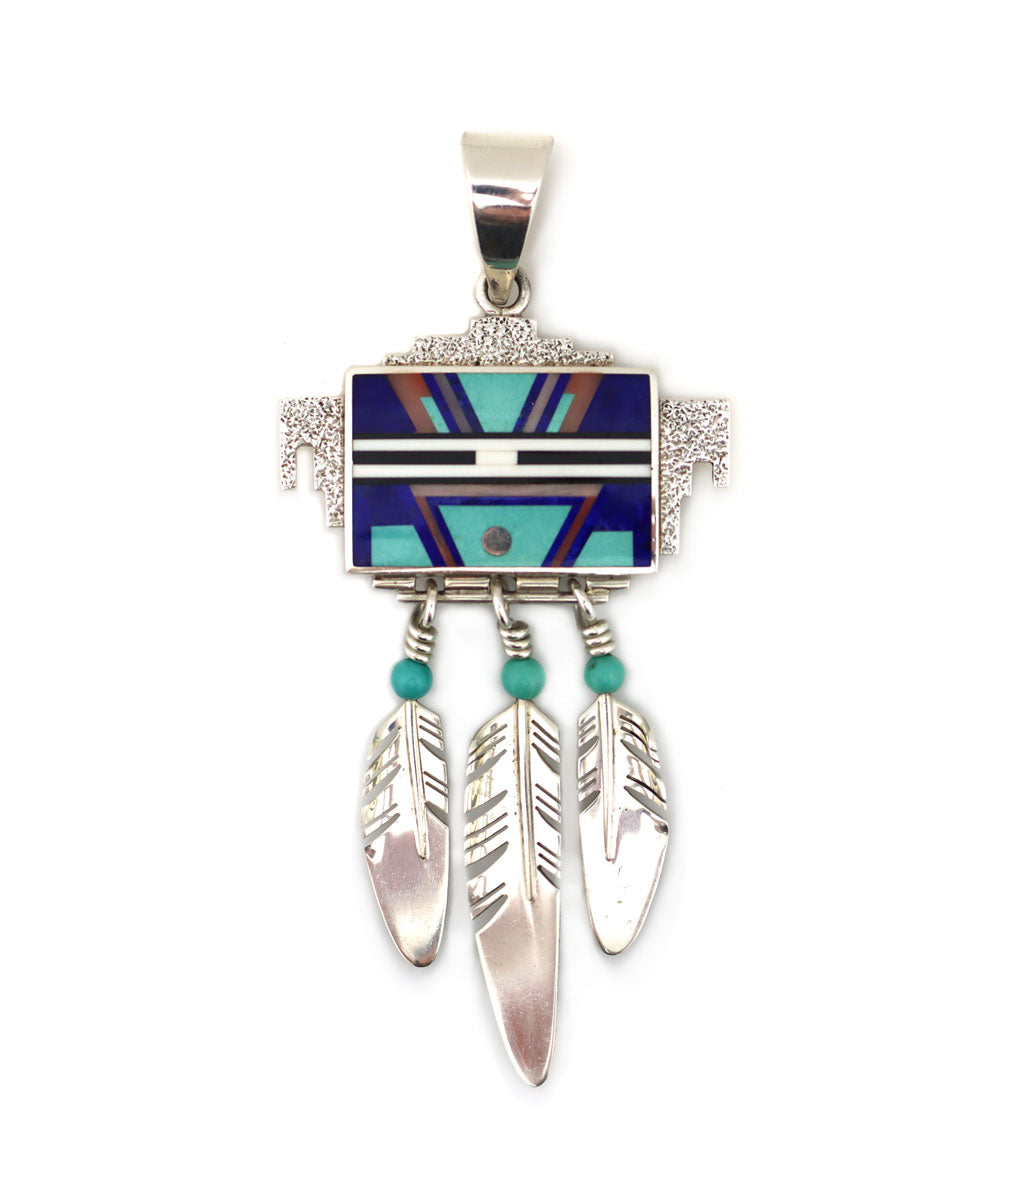 Ray Tracey (b. 1953) - Navajo Contemporary Multi-Stone Inlay and Sterling Silver Kachina Pendant, 3.5" x 1.625" (J91318C-0422-001)